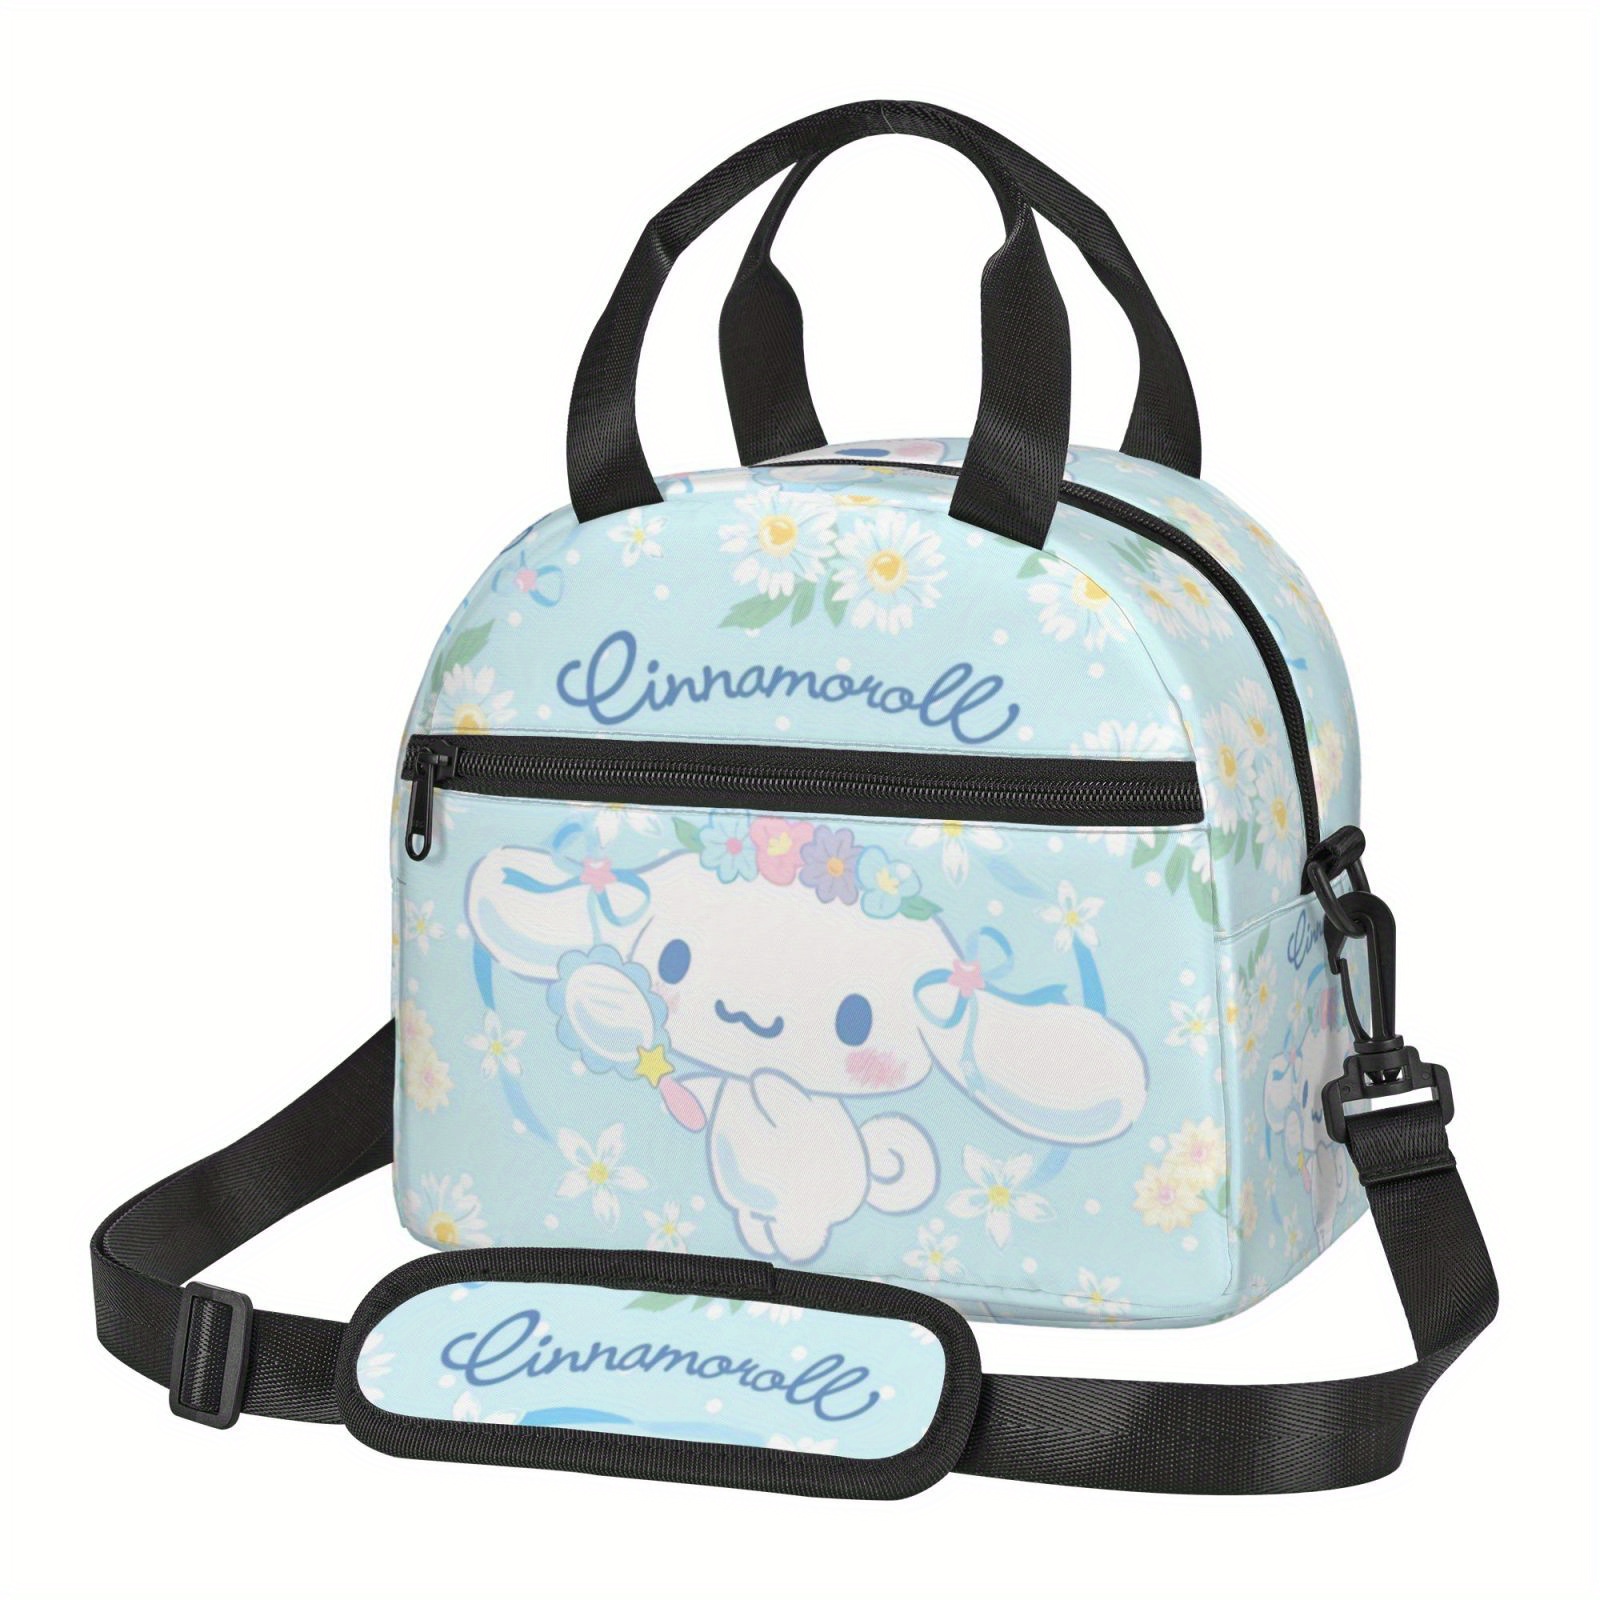 

1pc, Authorized By Sanrio Cinnamoroll Lunch Bag, Unisex Cute Lunch Box Insulated Bag, Small Cooler Shoulder Bag For Work Office Beach Picnic